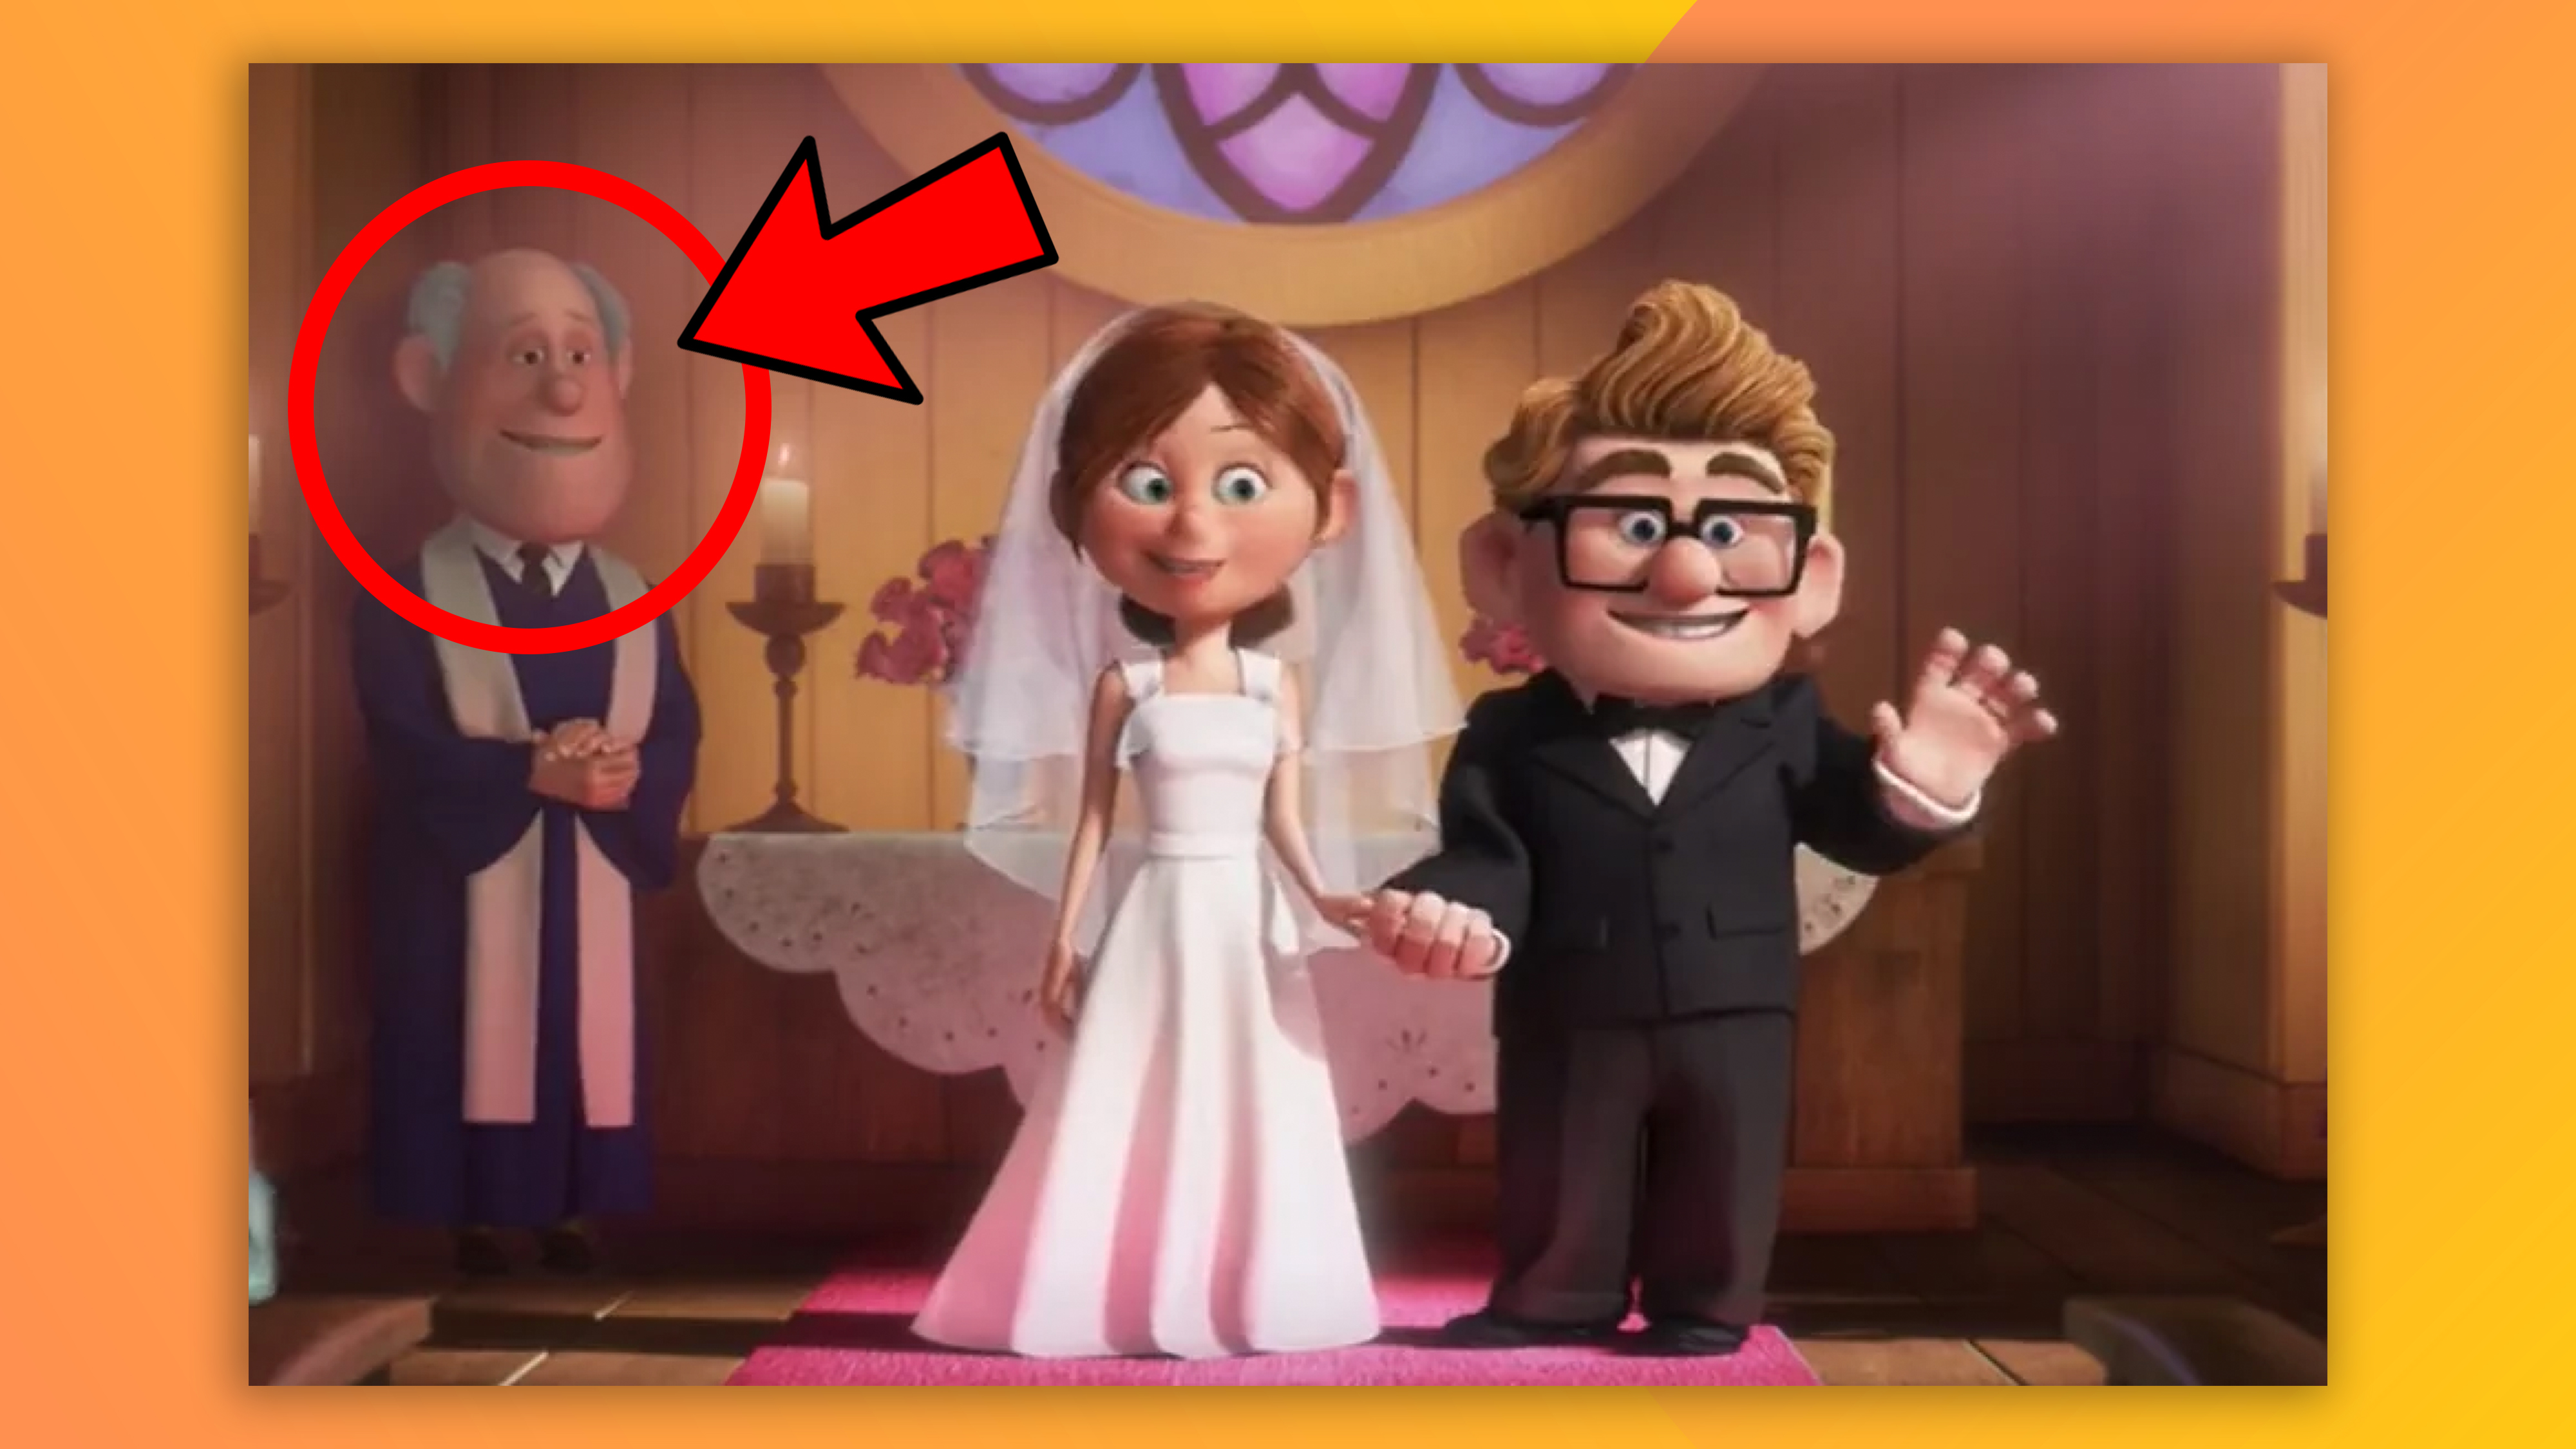 Noticed something while rewatching Pixar's Up. Disney had planned